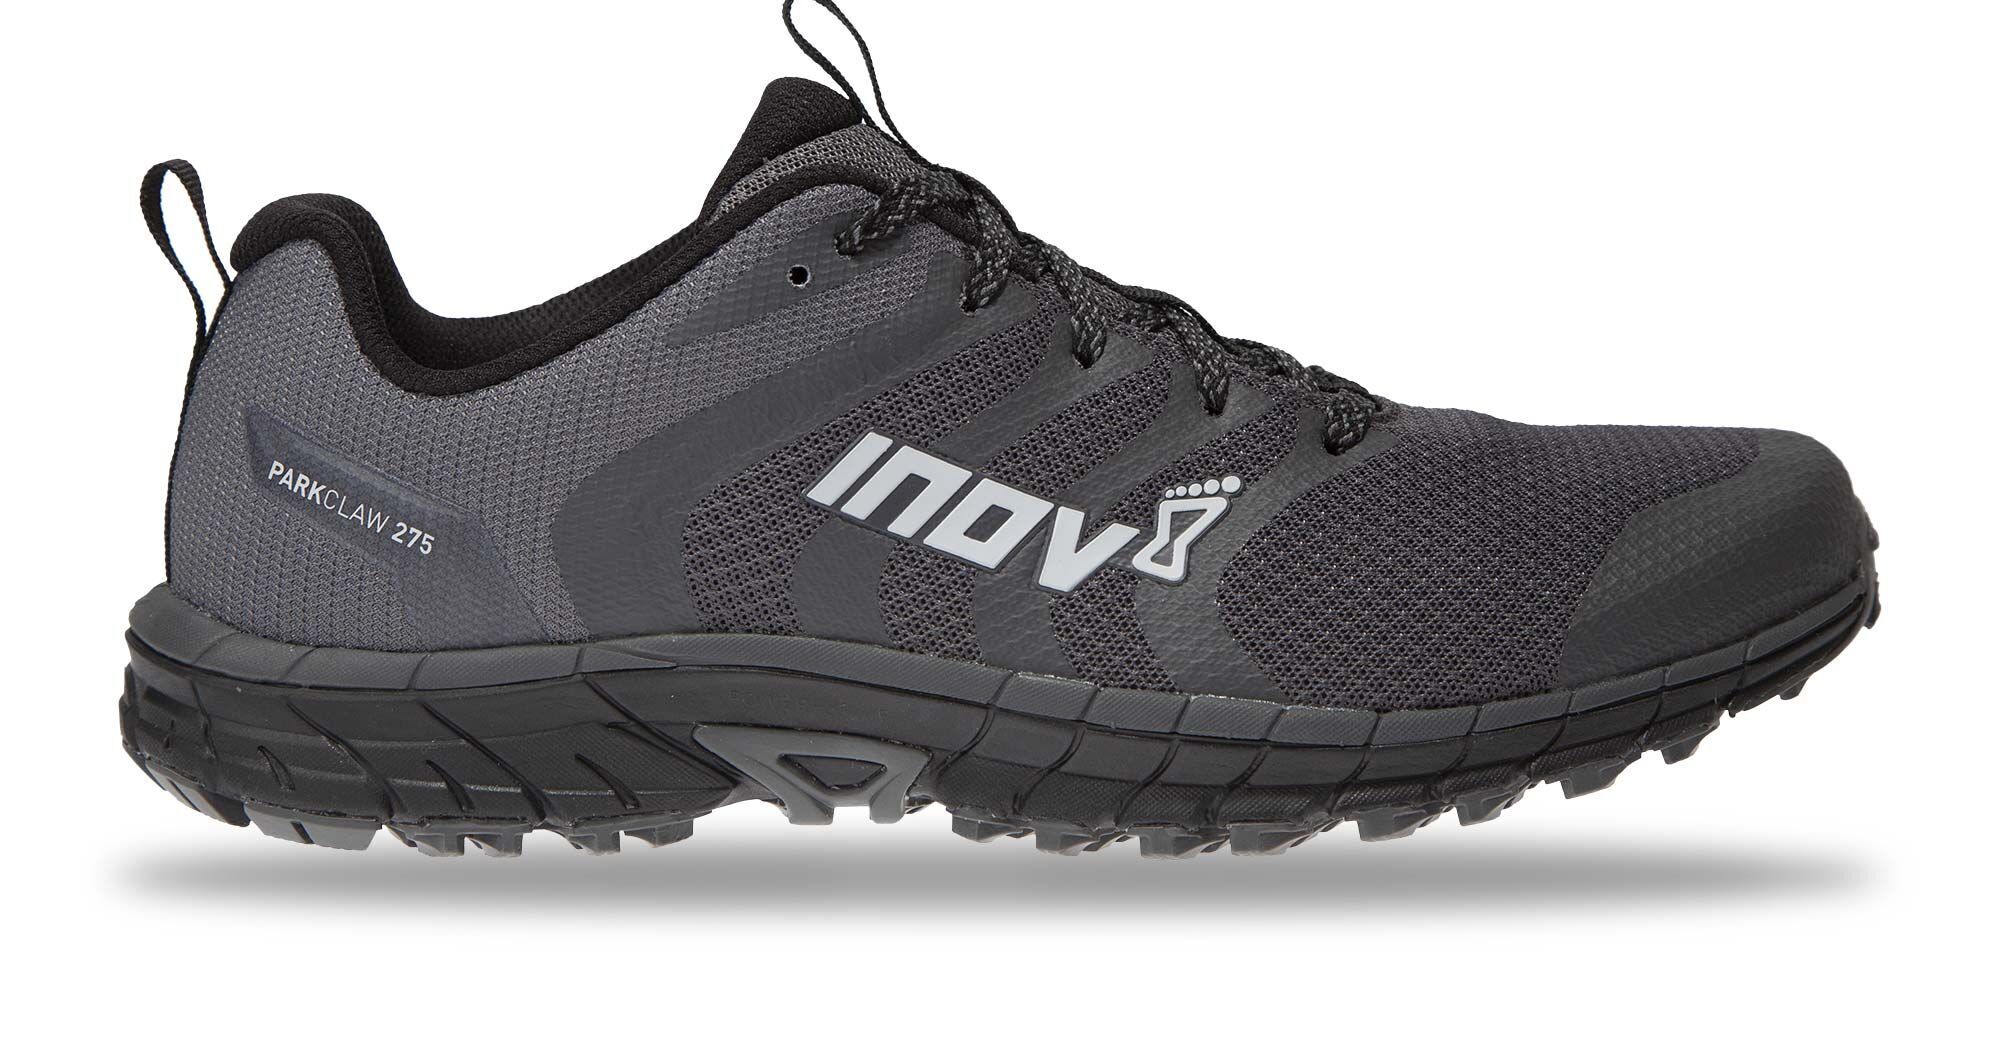 Inov-8 Parkclaw 275 - Chaussures trail homme | Hardloop